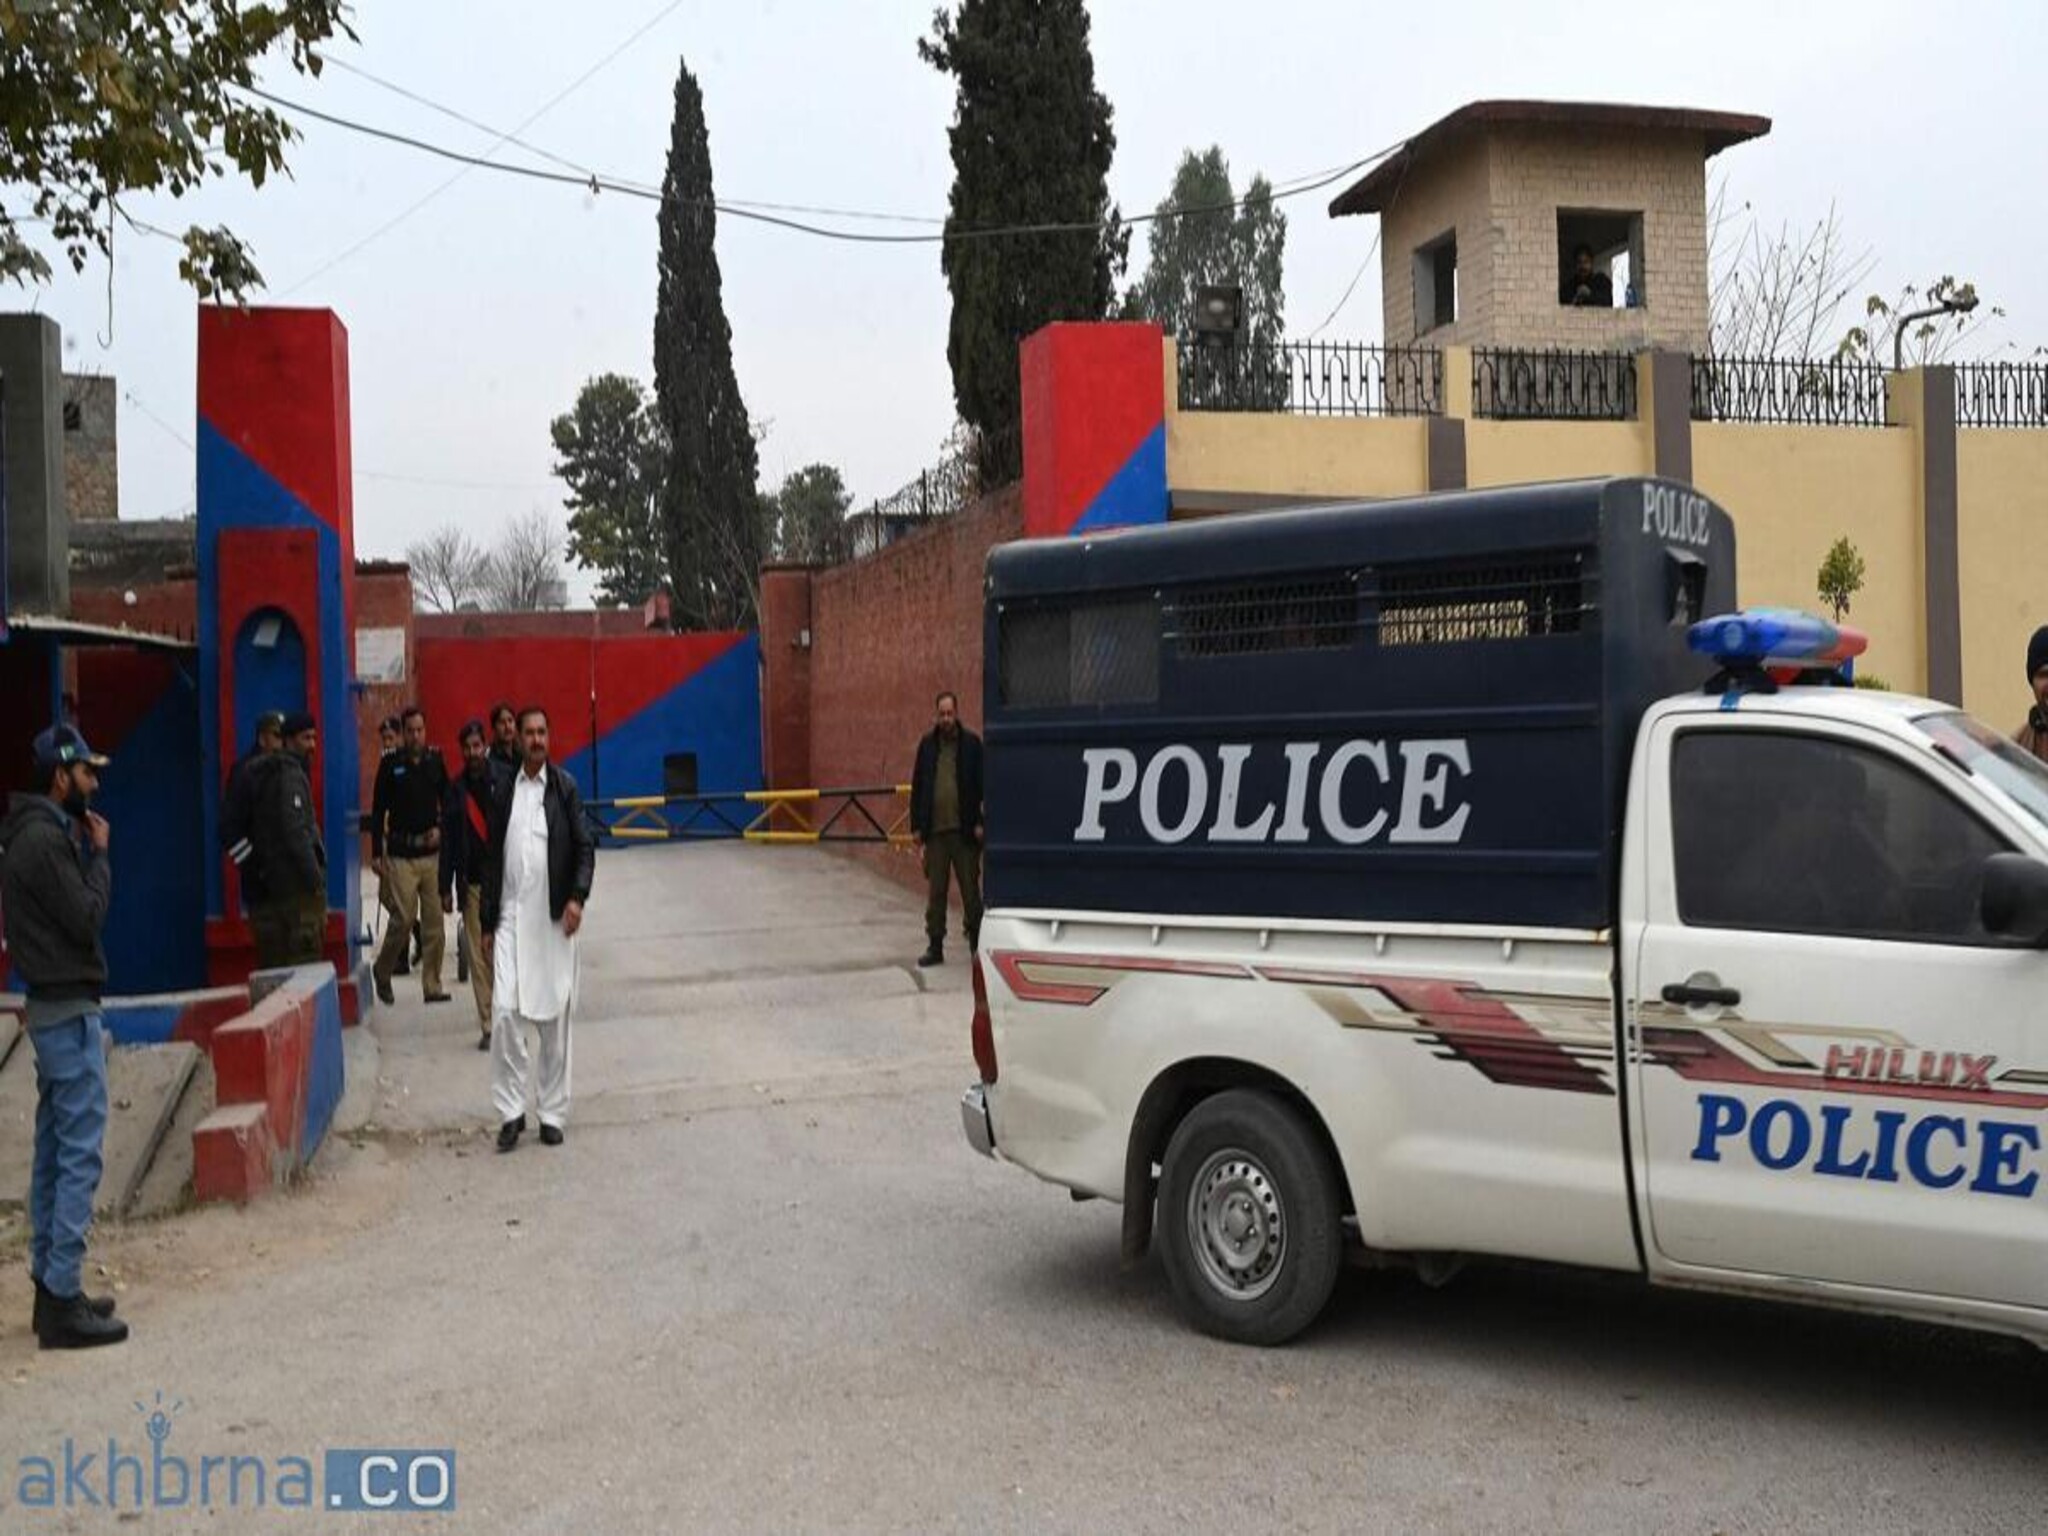 Pakistan: Adiala Jail Security Intensified due to serious threat